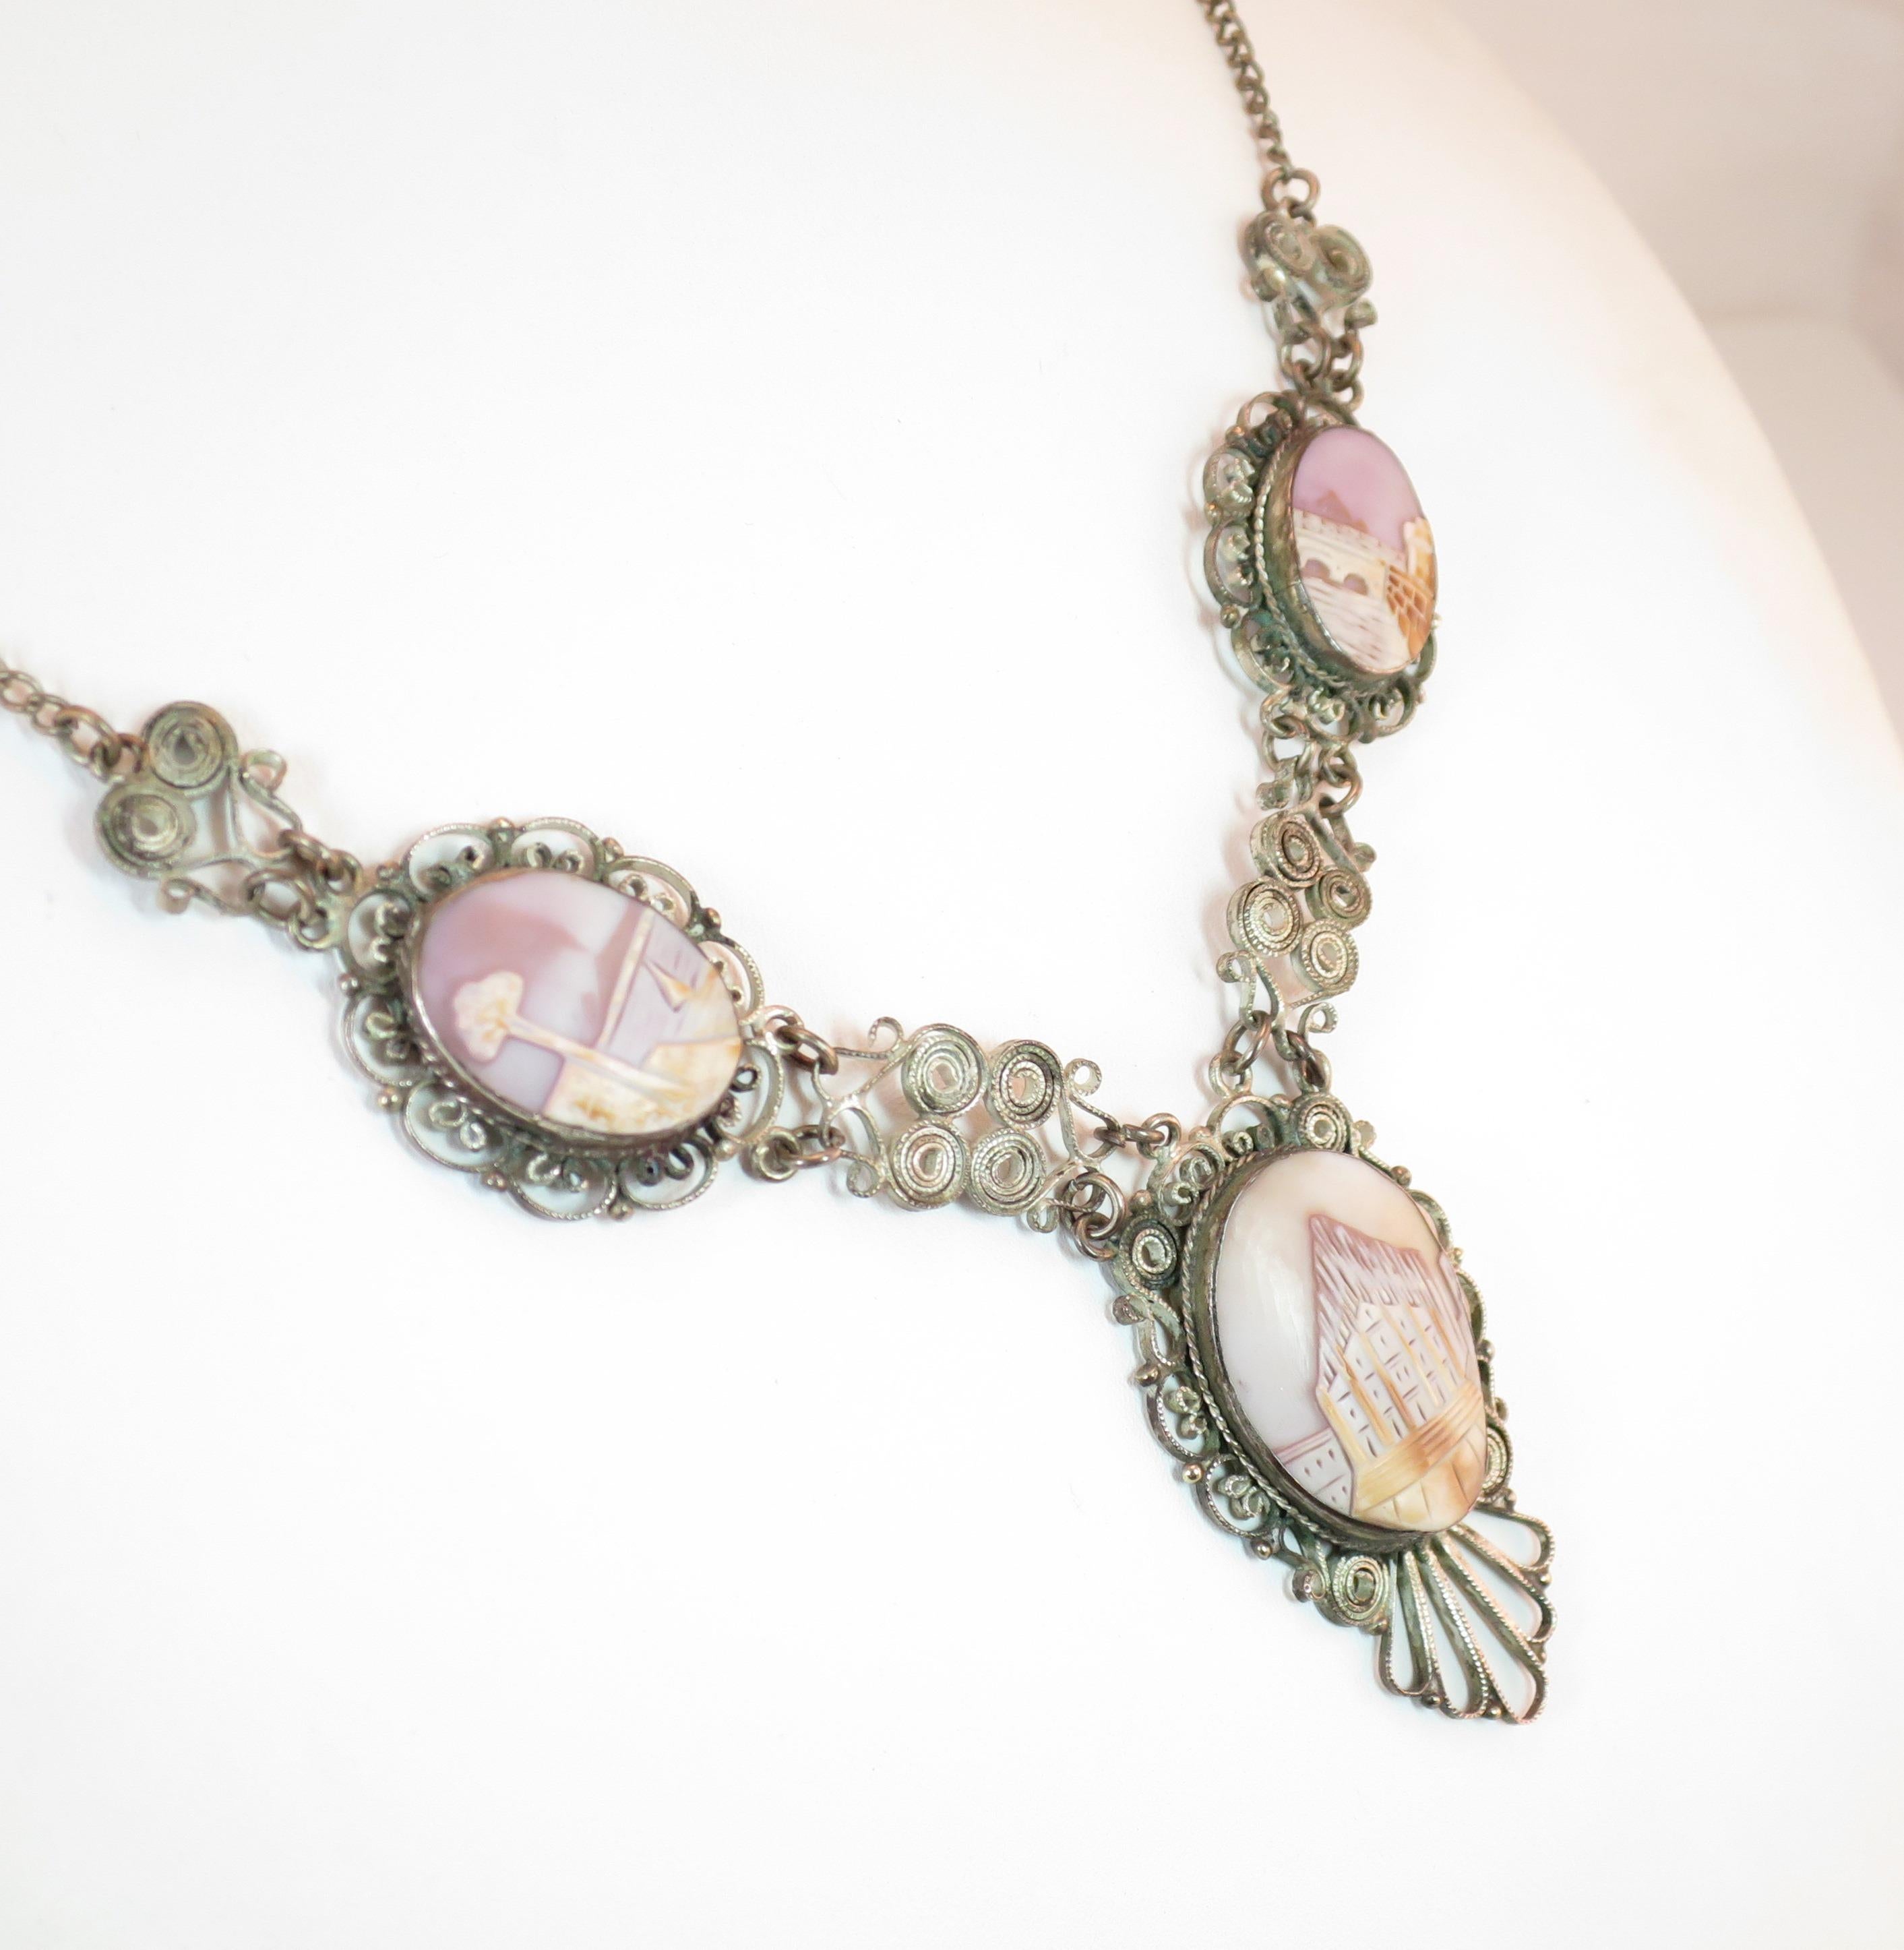 Offered here is a Victorian-style landscape shell cameo silvered filigree necklace from Italy in the 1950s. The central portion consists of three linked platforms in a filigreed open-back design linked by segments of flattened spiral filigree. The